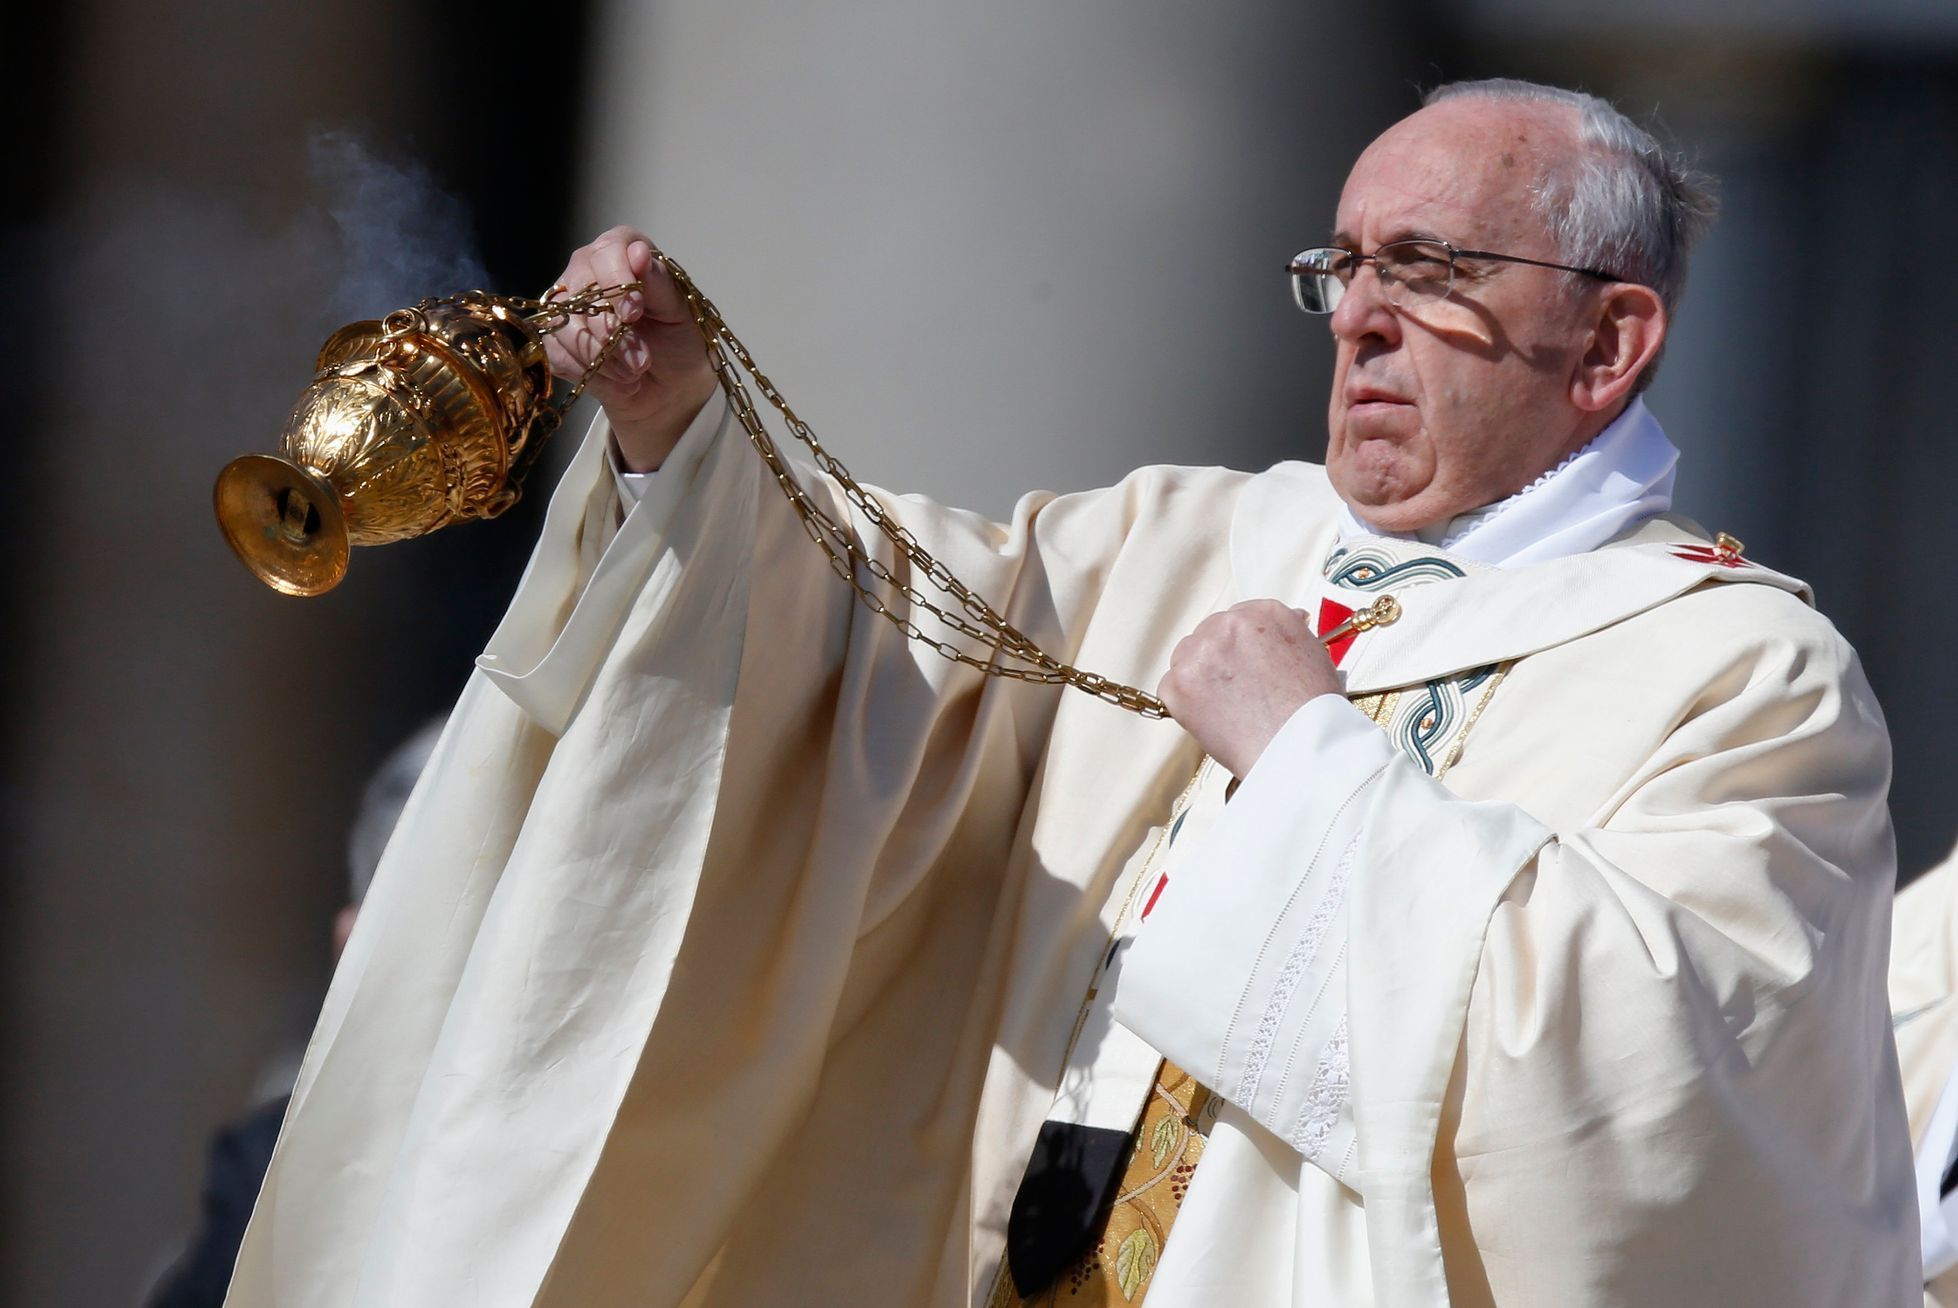 Pope Francis uses incense burner as he leads the Easter mass in Saint Peter's Square at the Vatican